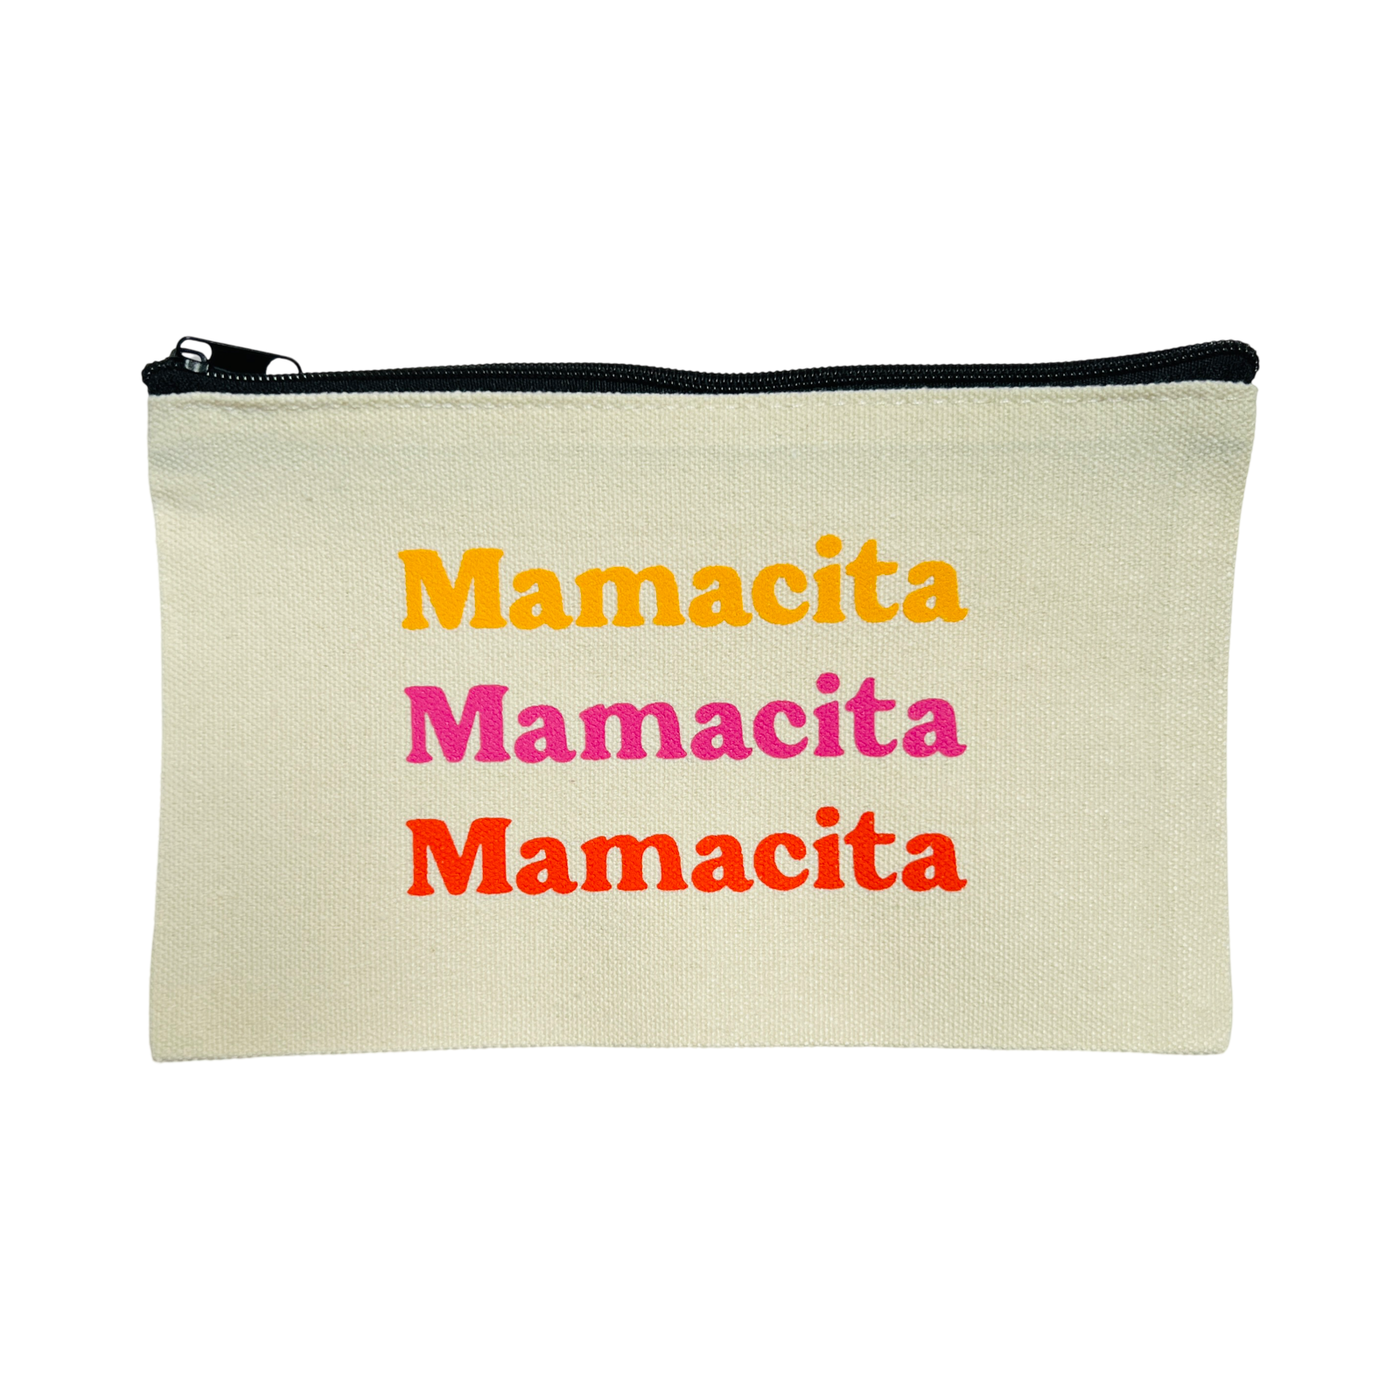 rectangle canvas zip pouch with the word Mamcita three times int he colors yellow, pink and orange.